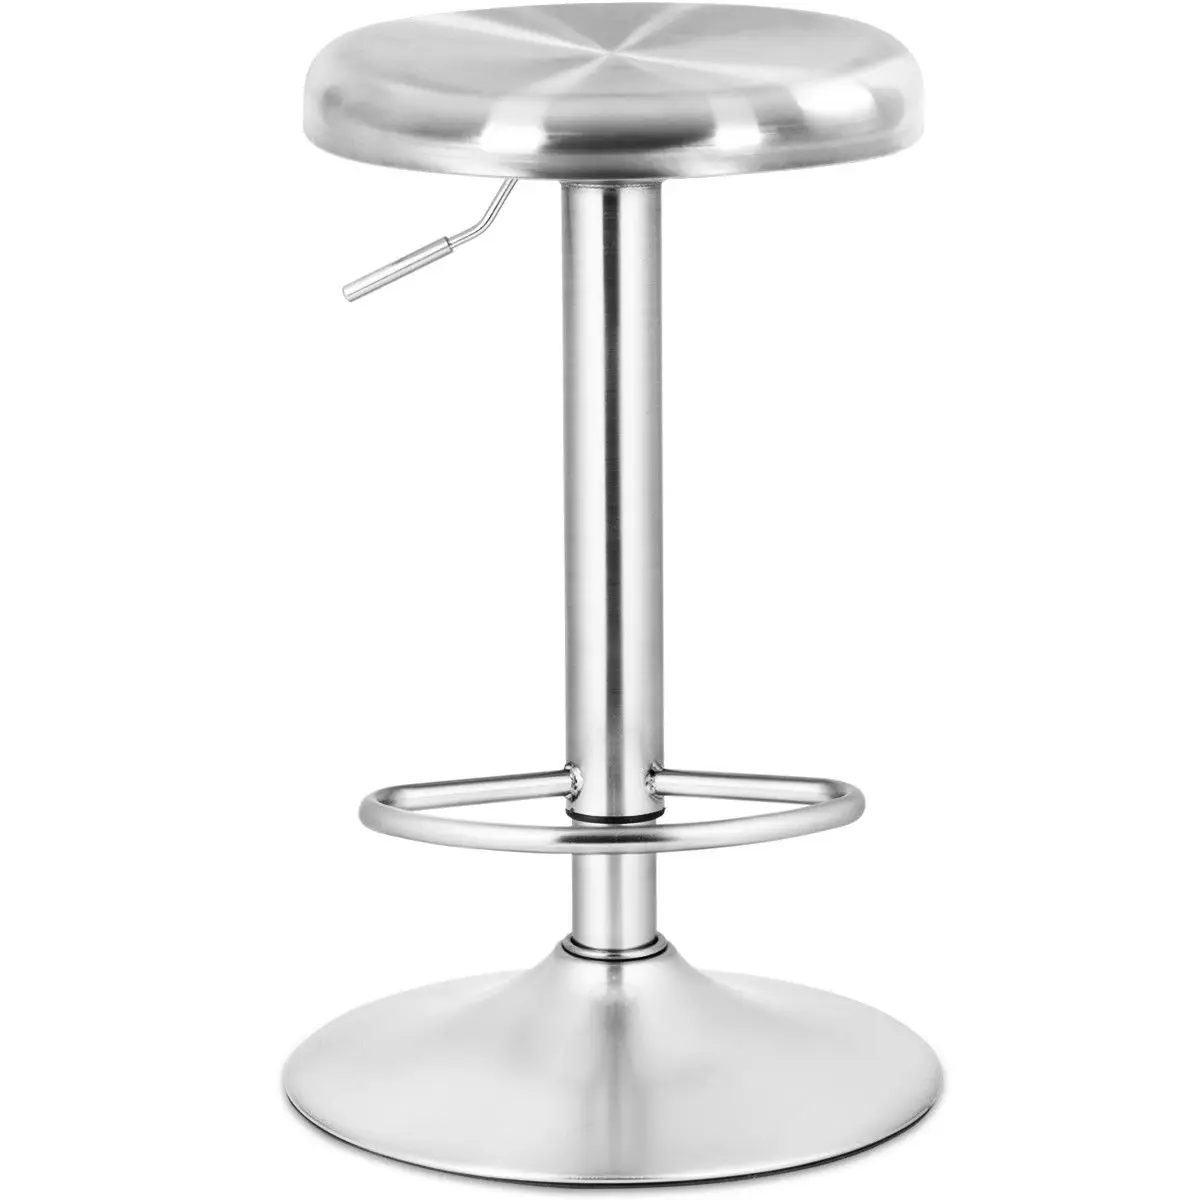 Costway Brushed Stainless Steel Swivel Bar Stool Seat Adjustable Height Round Top Silver HW58848